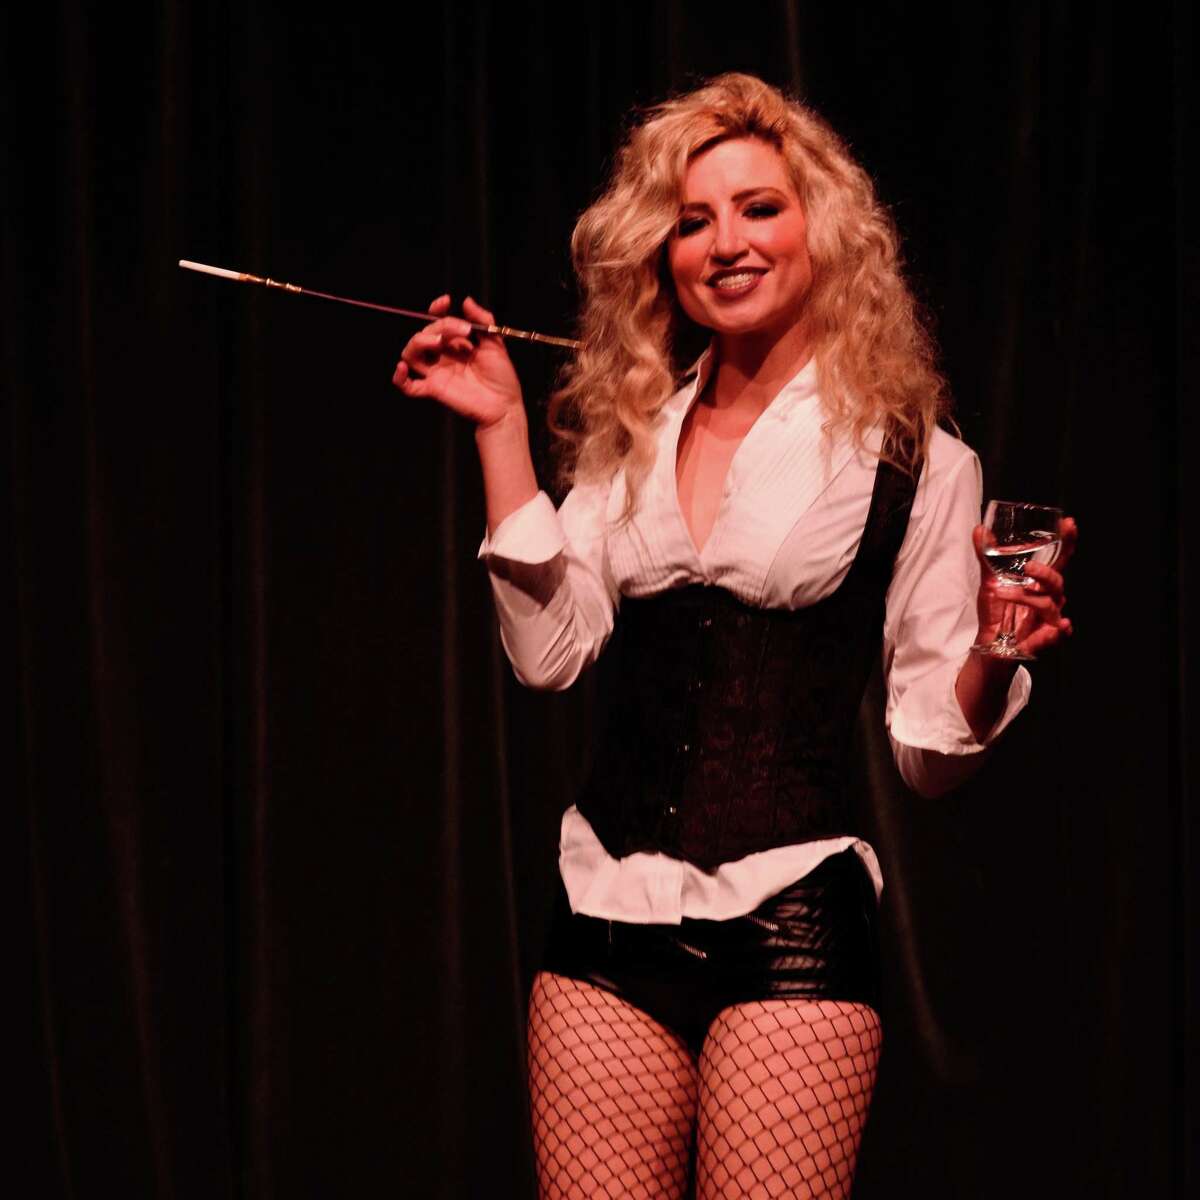 The Players Theatre Company opens "Cabaret" at the Owen Theatre May 7. The show then runs through May 30. Jade Kelly is Sally Bowles in the show.